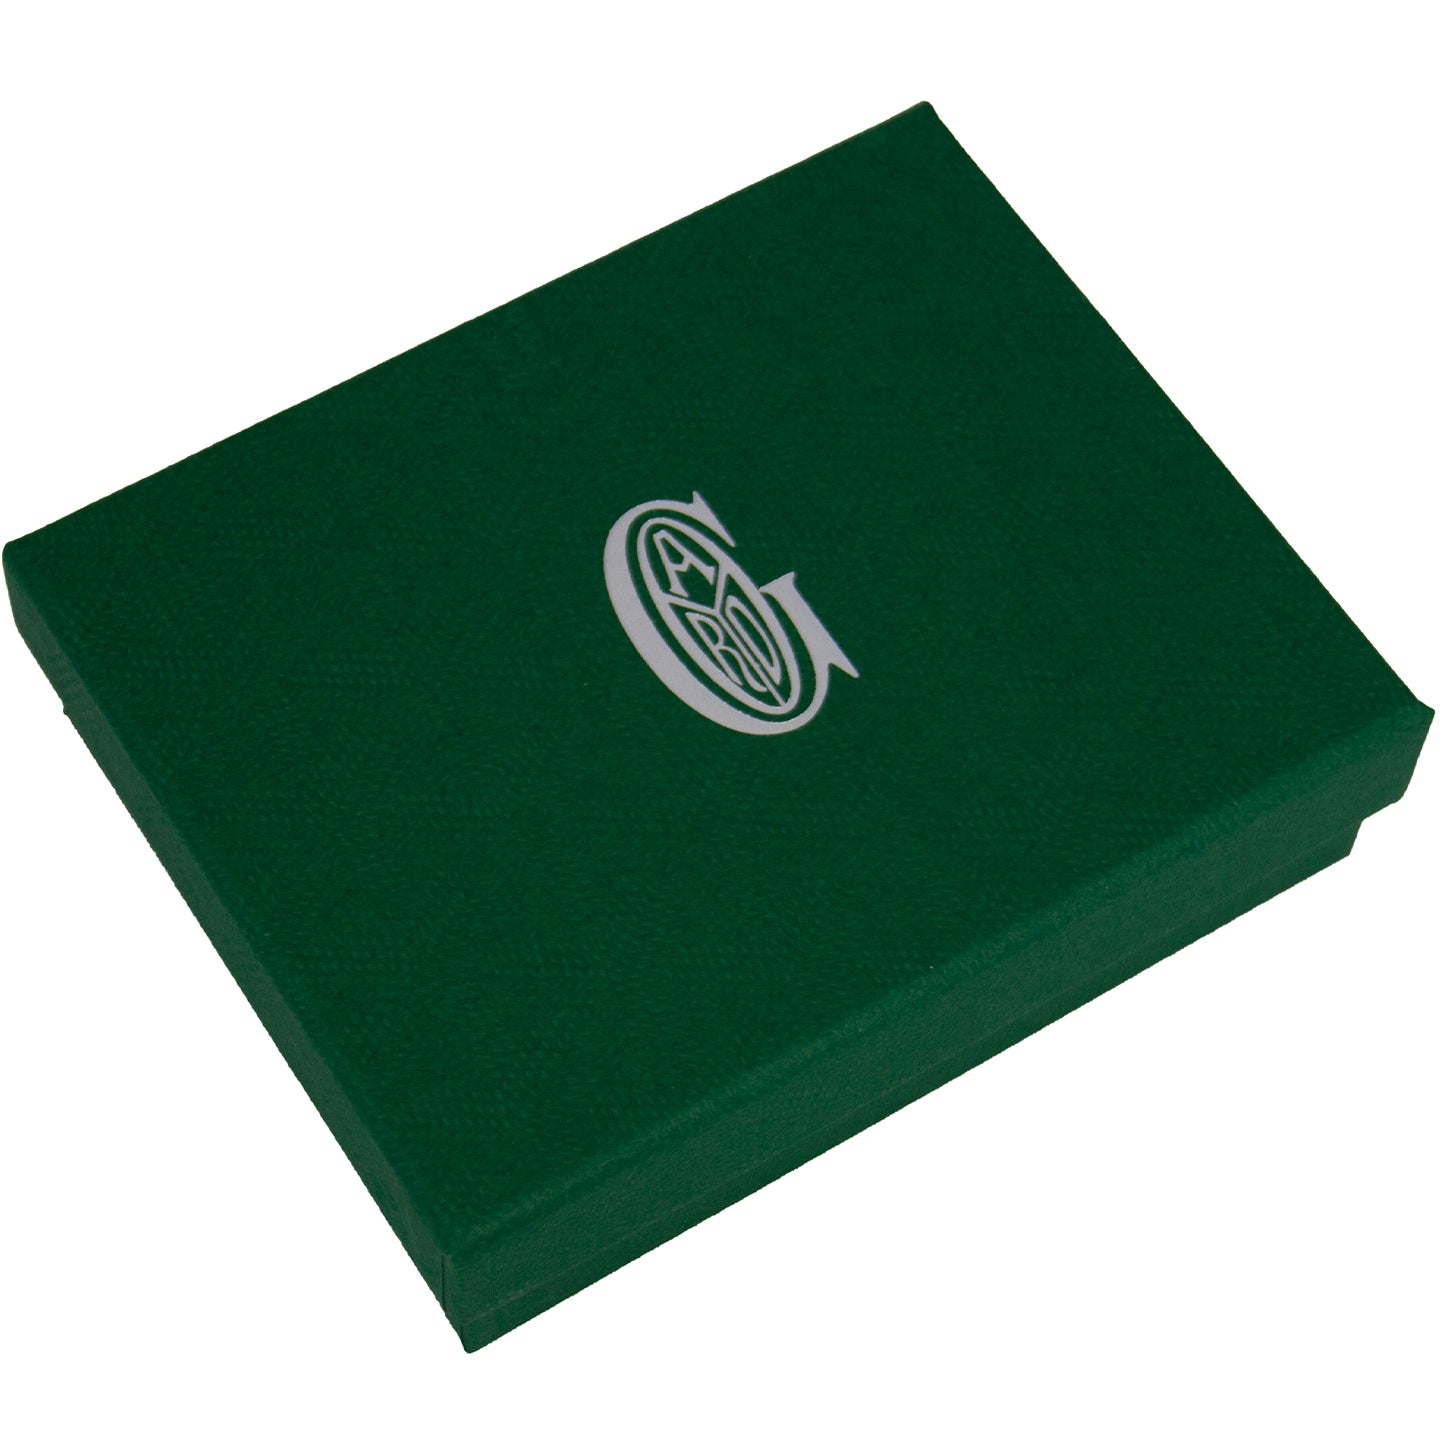 Step 6: Inspect the shininess of the Goyard Saint Sulpice card holder